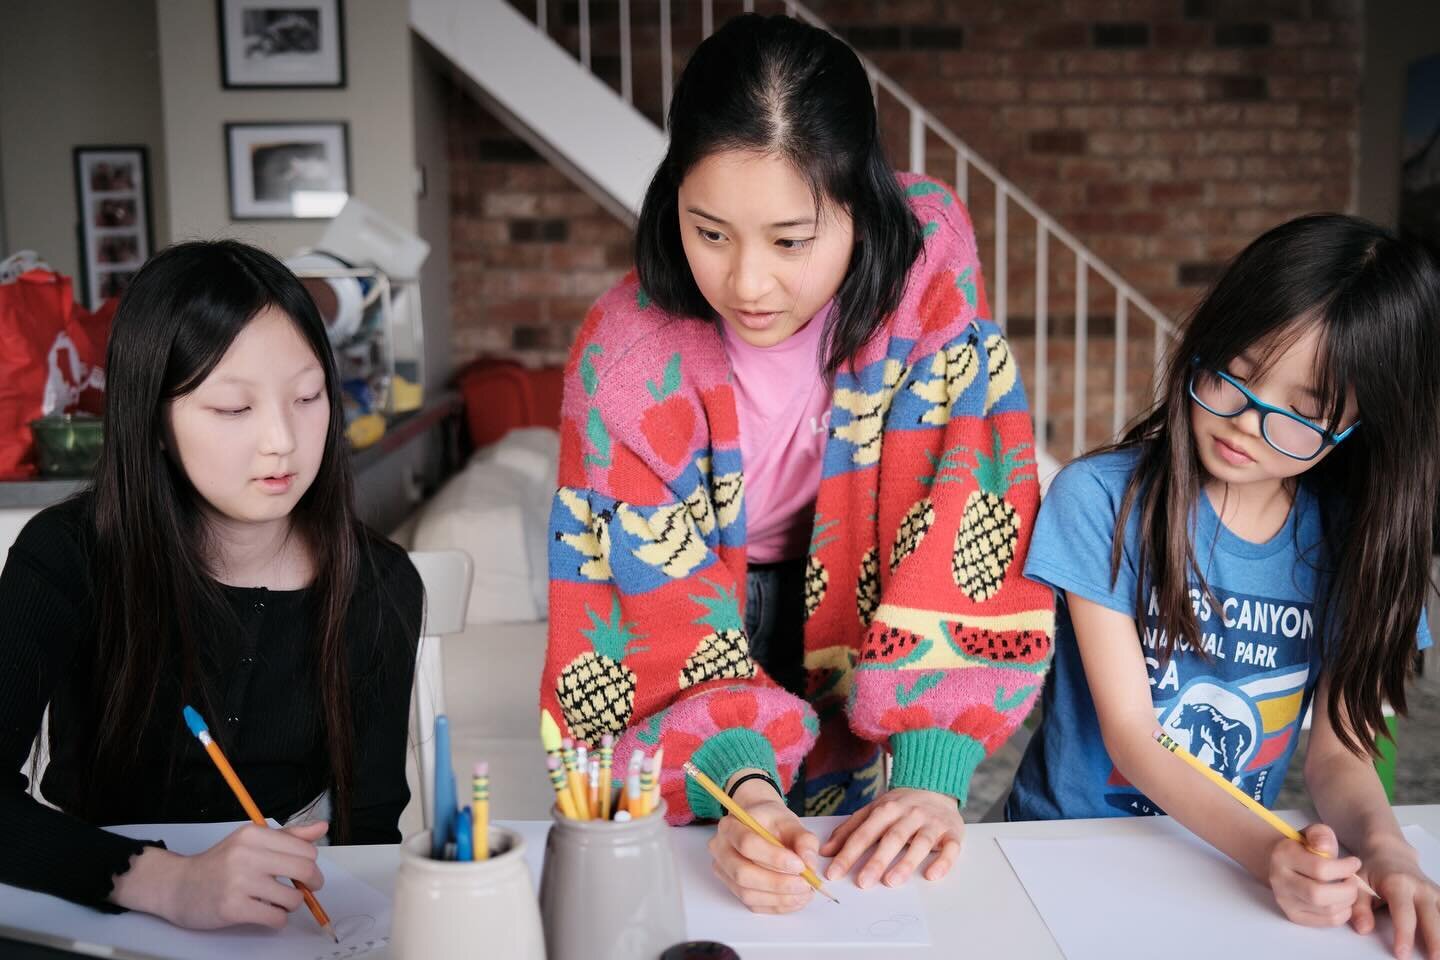 On Saturday @cassiezhangs taught the girls lots about watercolors.